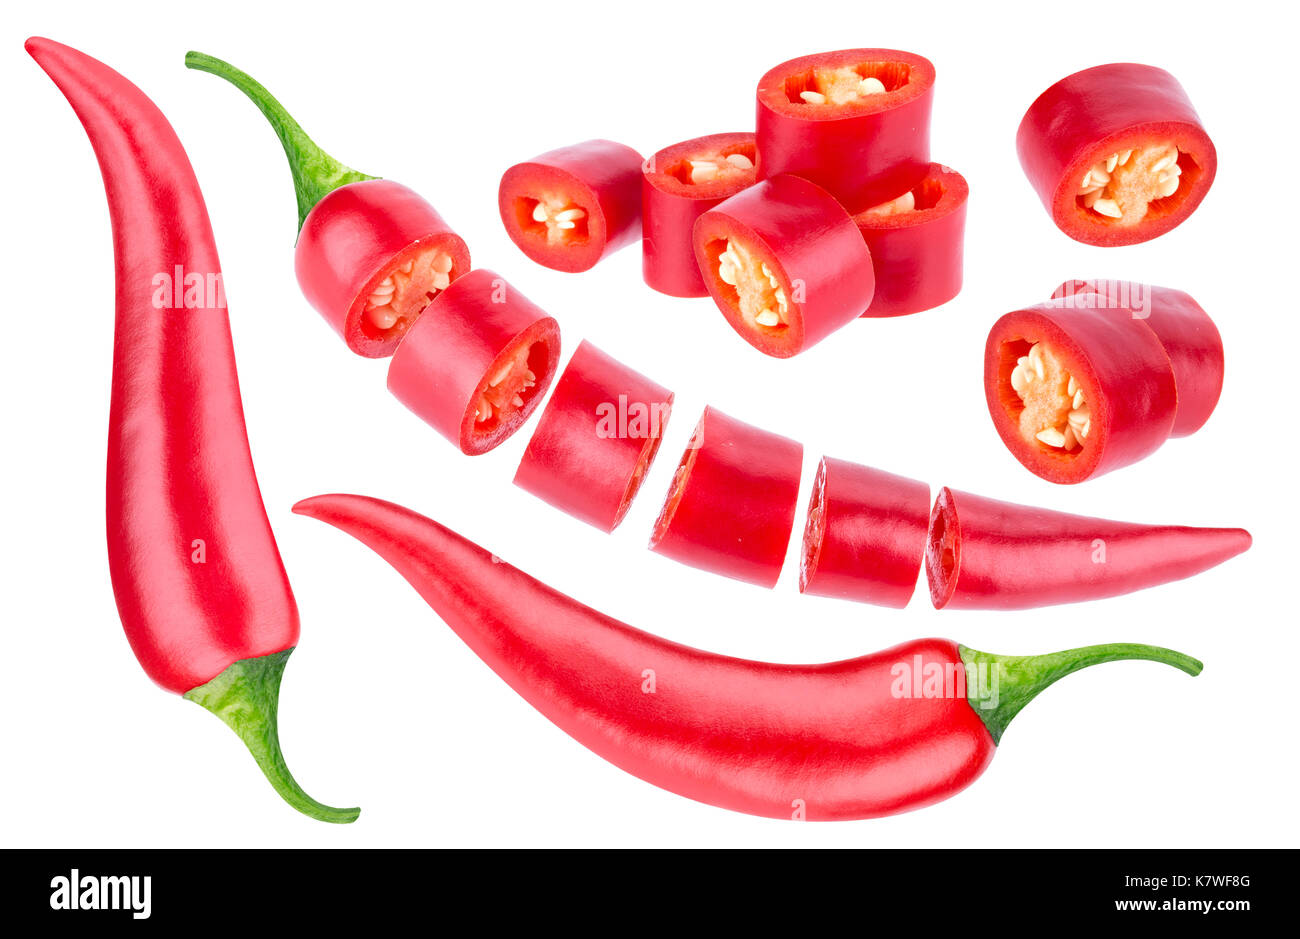 Chili pepper isolated on white background. Collection Stock Photo